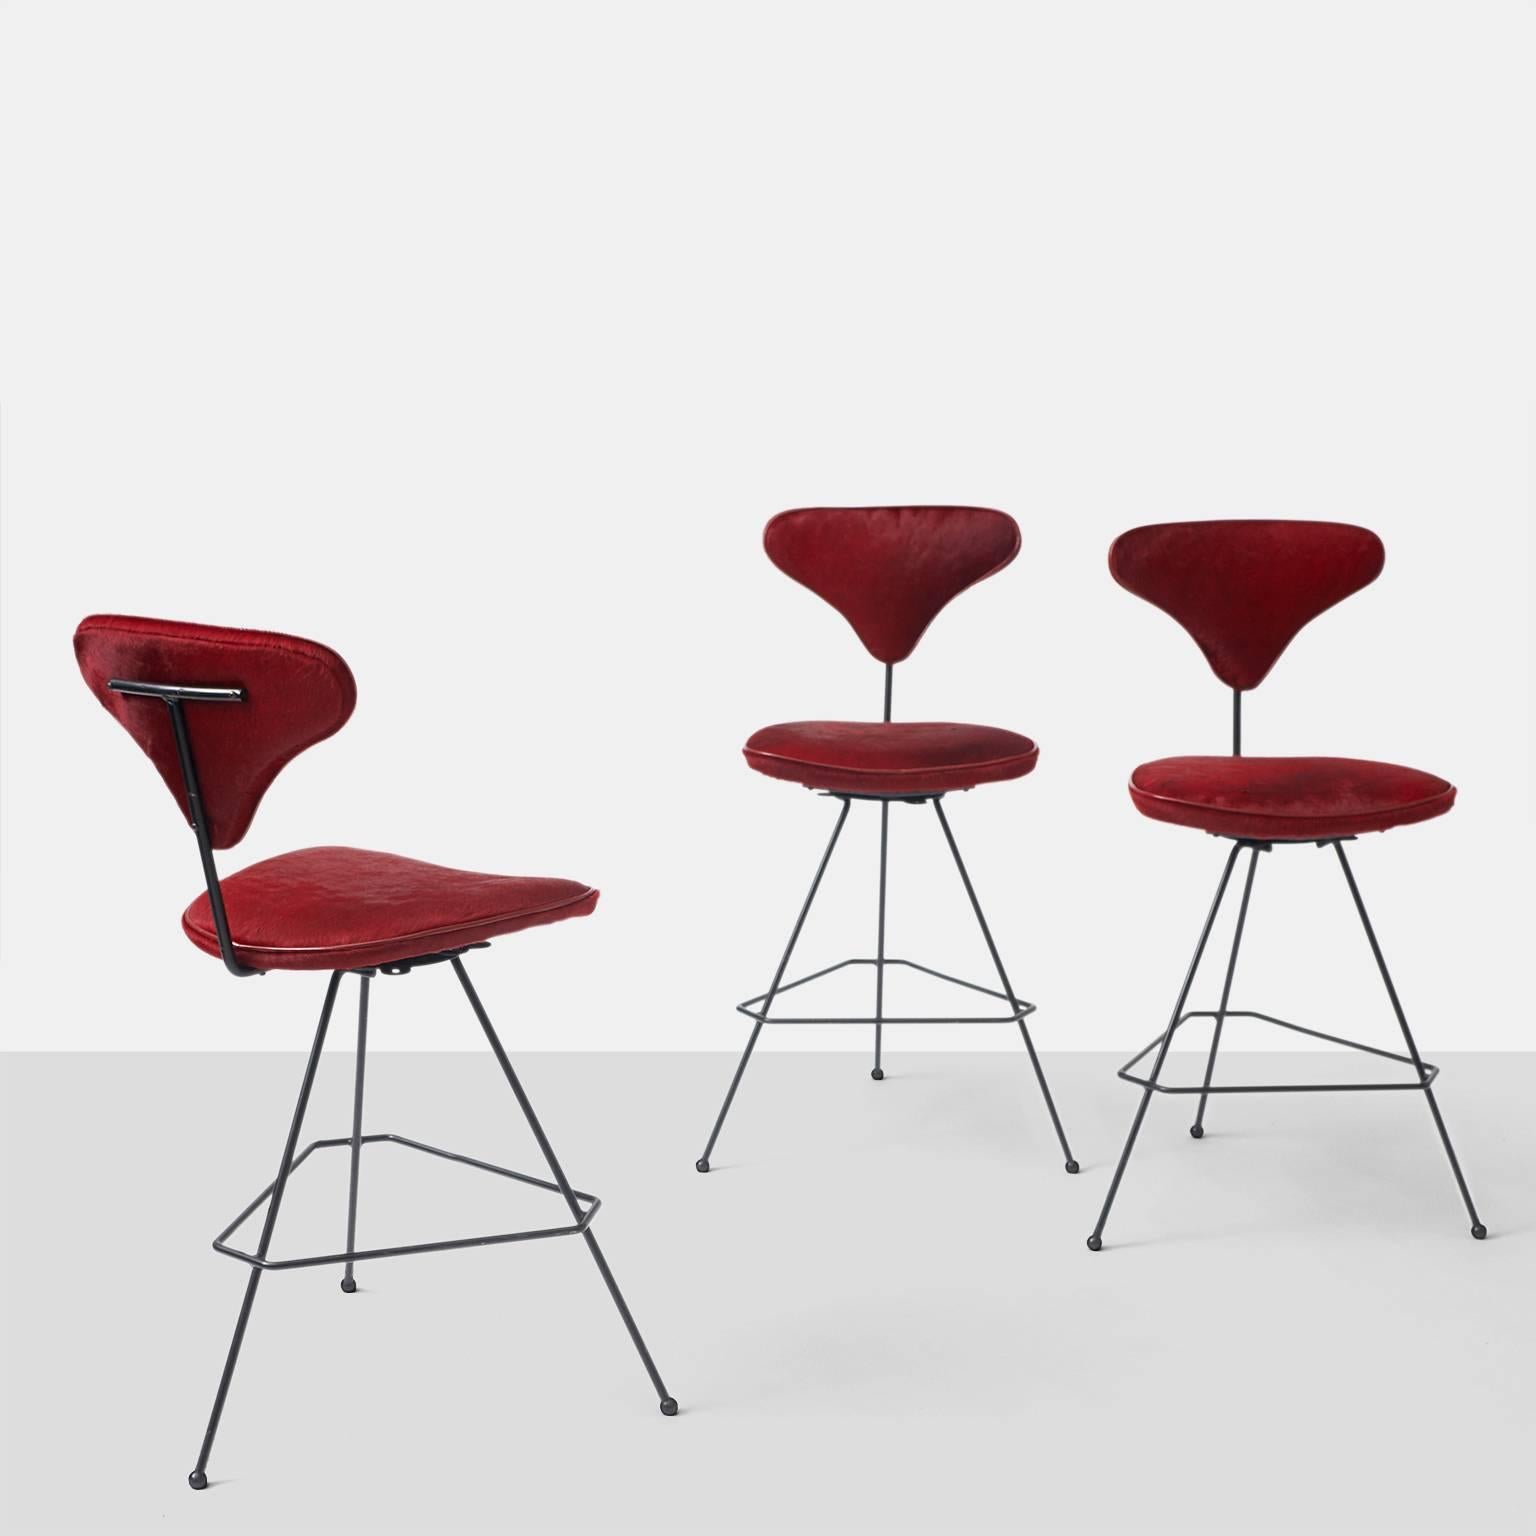 A group of three bar stools with a swivel base and black iron frame. The seat and back have been upholstered in a red hair on hide with red leather trim. The stools were made for Elton in 1950.